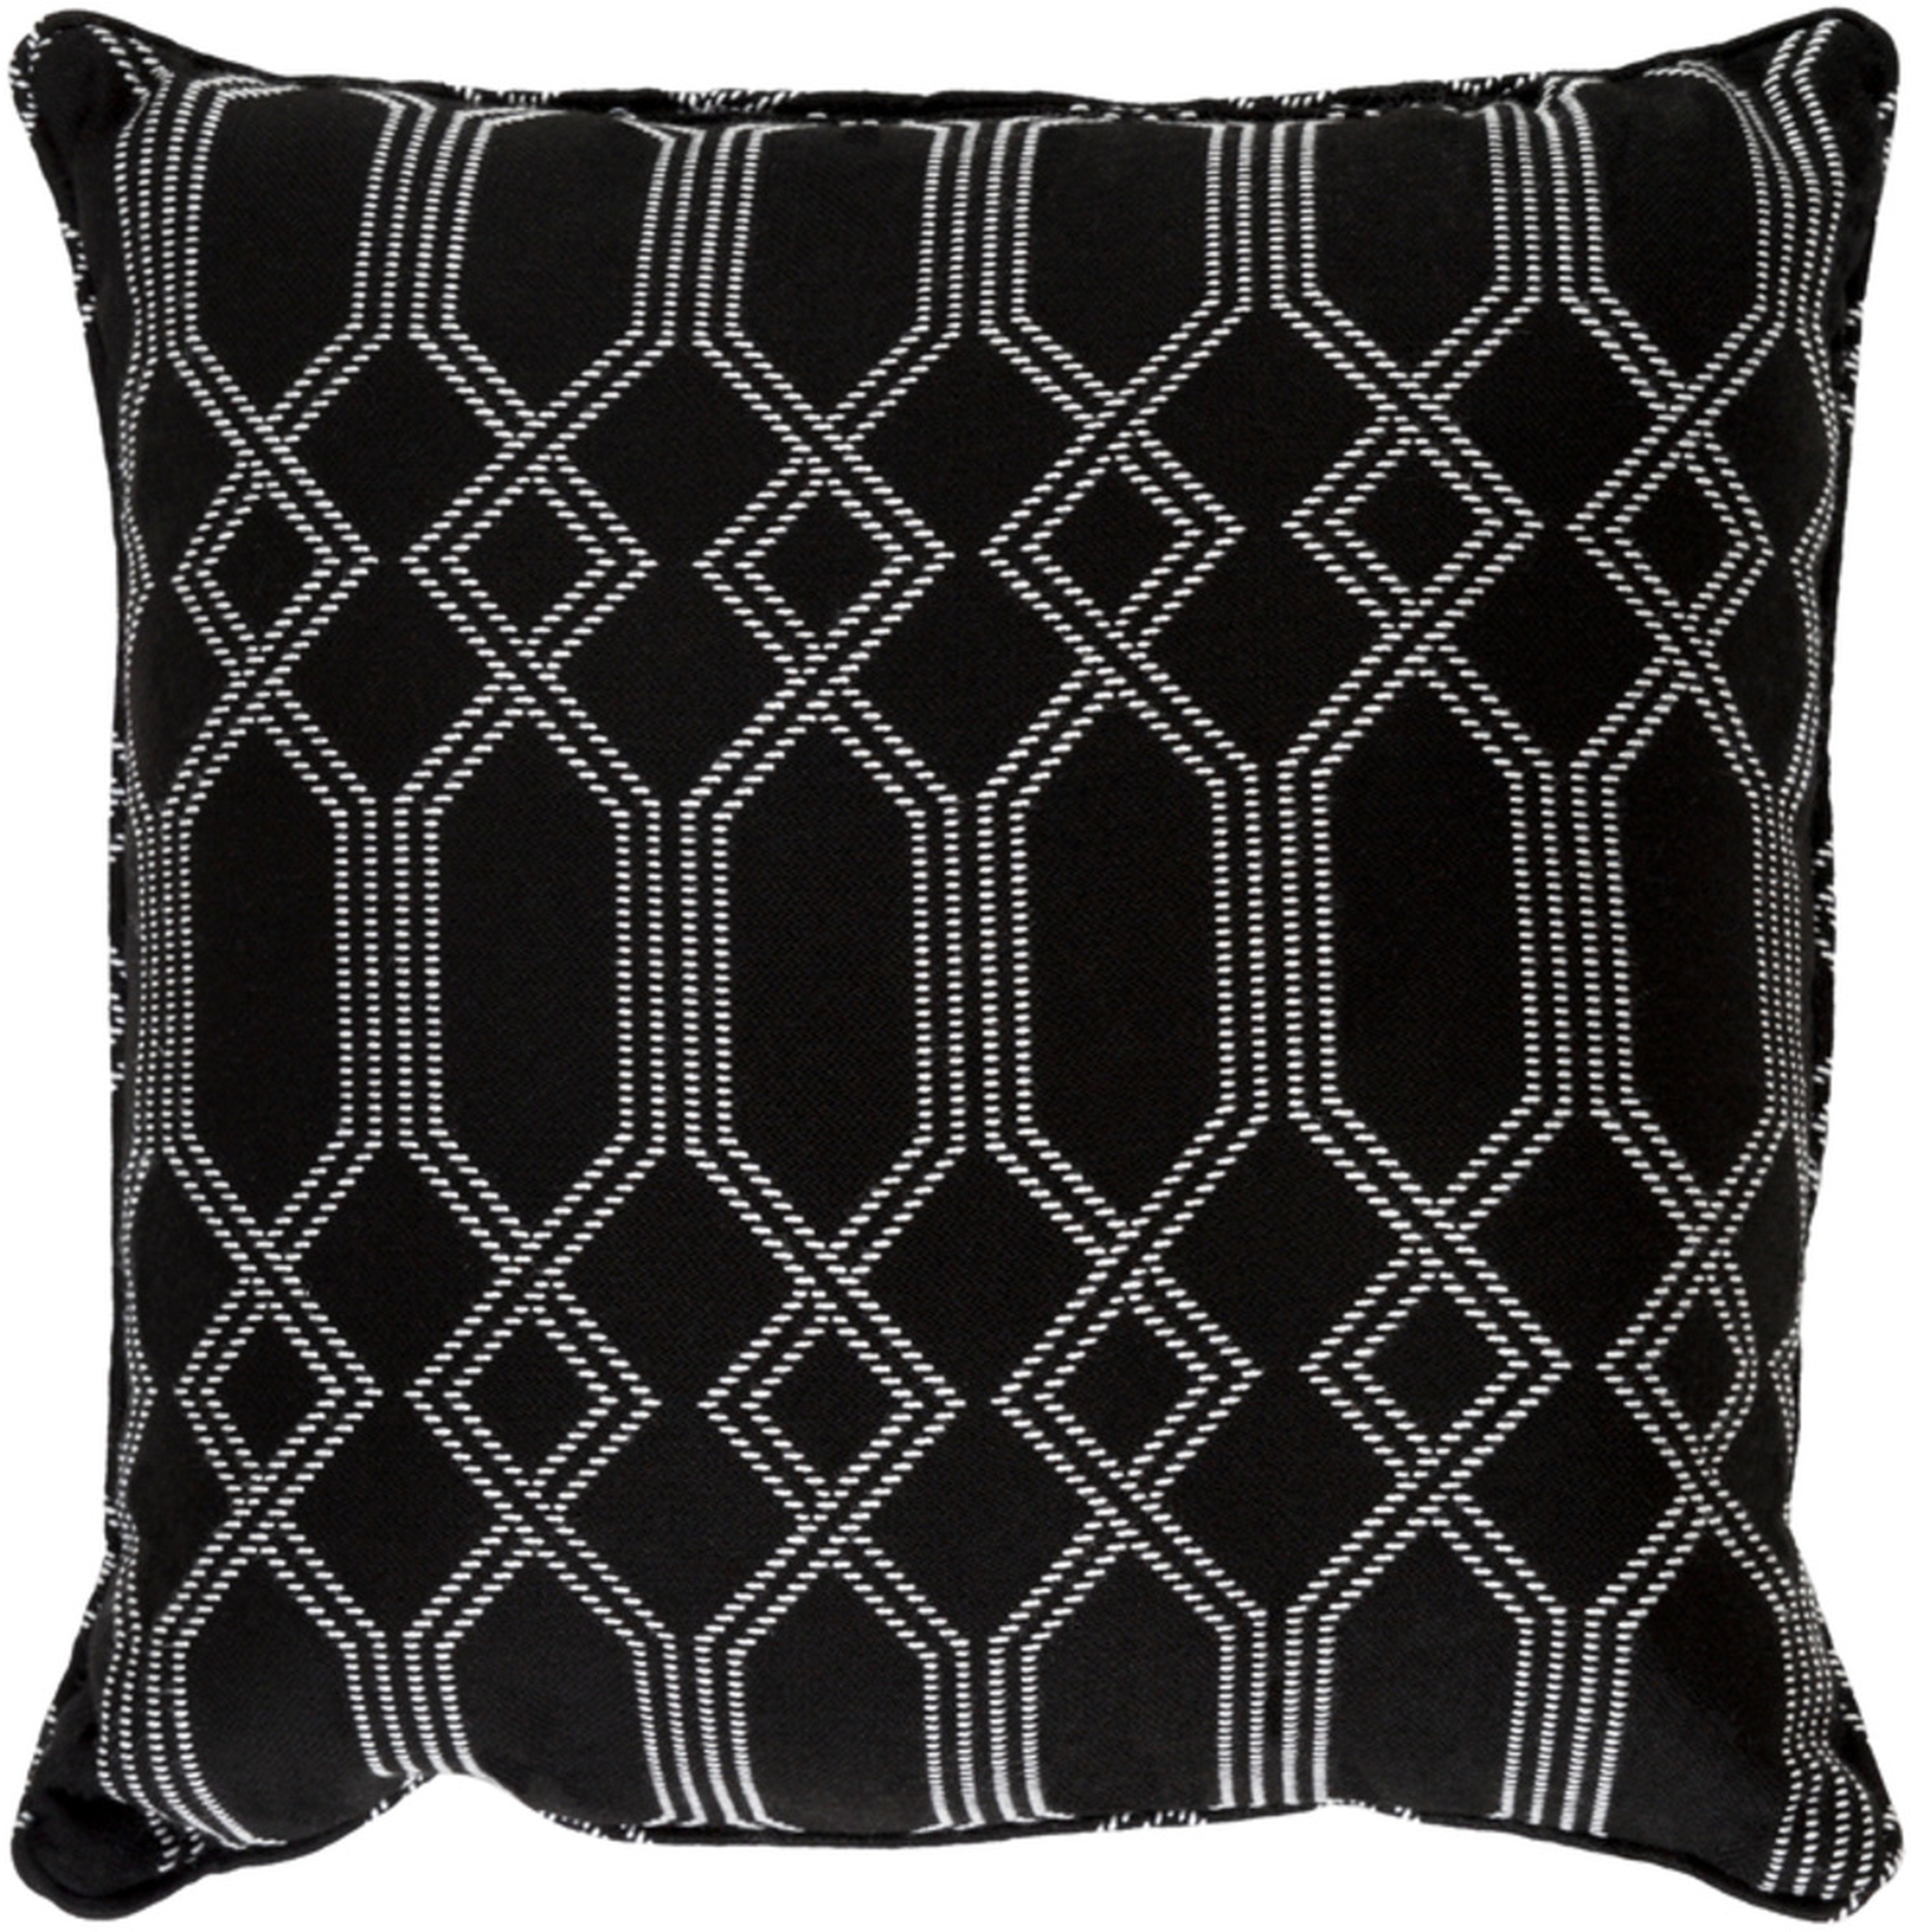 Crissy - 16" x 16" Pillow Cover - Surya